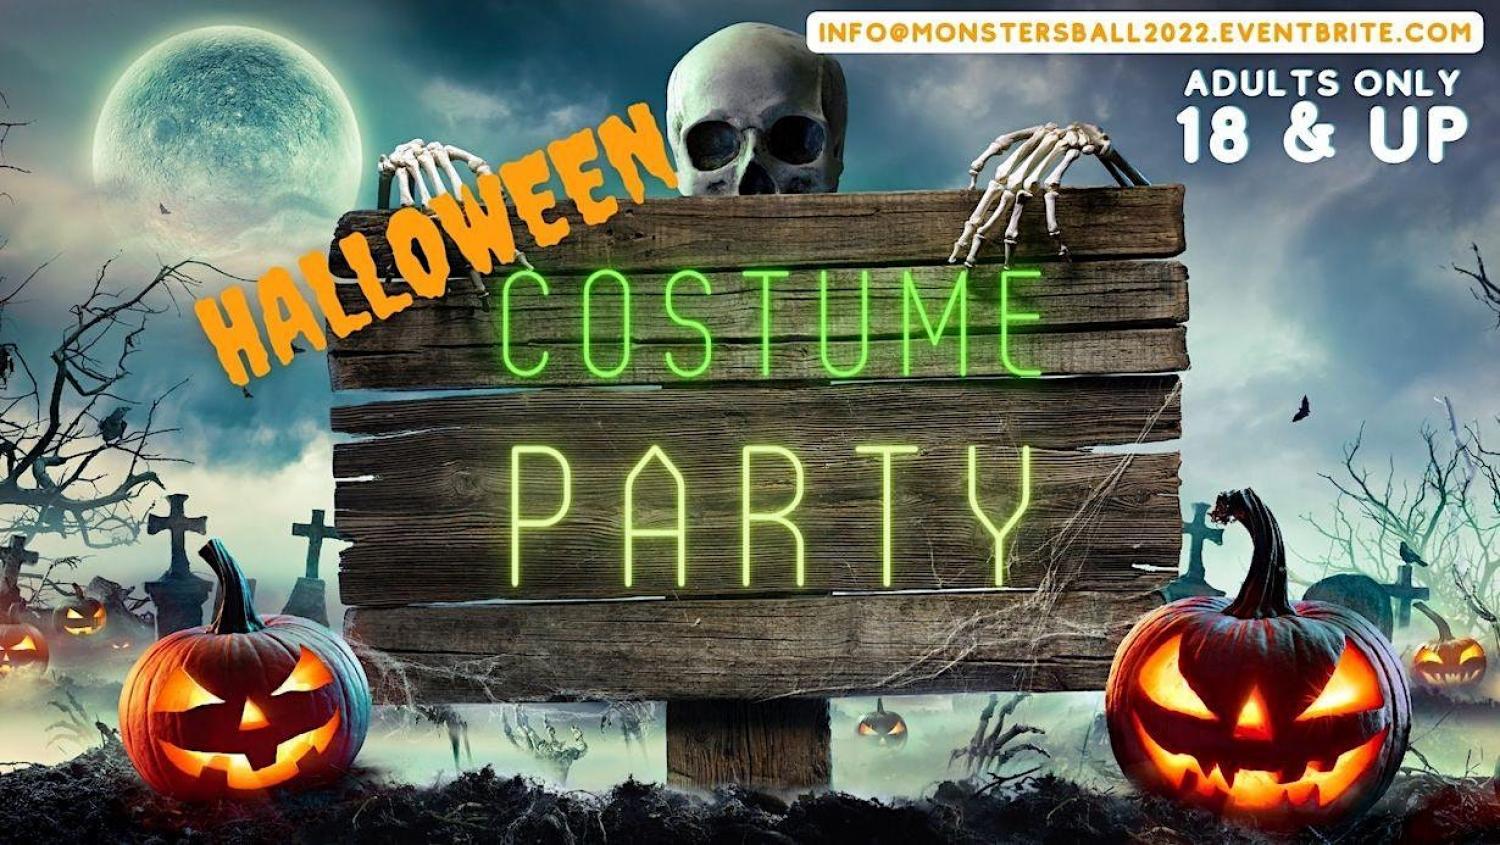 Monsters Ball |A Halloween Themed Murder Mystery Costume Party (18+ only)
Sun Oct 30, 8:00 PM - Mon Oct 31, 2:00 AM
in 11 days